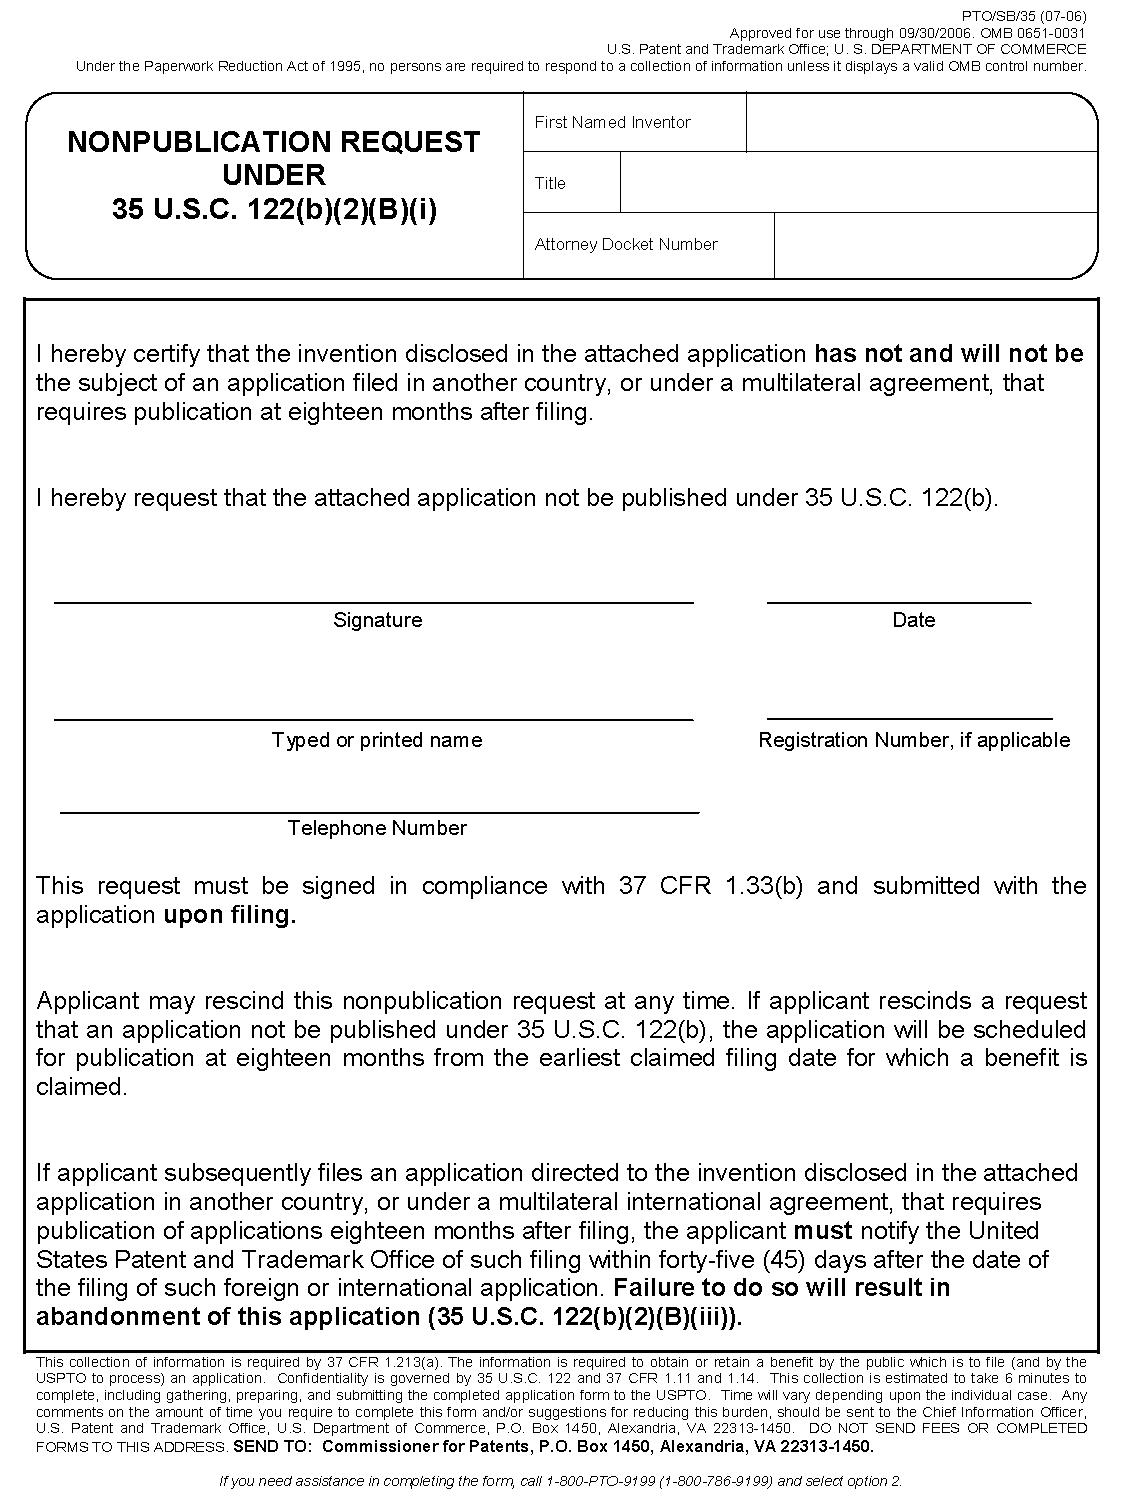 form pto/sb/36 rescission of previous nopublication request (35 u.s.c. 122(b)(2)(b)(iii)) and, if applicable, notice of foreign filing (35 u.s.c. 122(b)(2)(d)(iii))